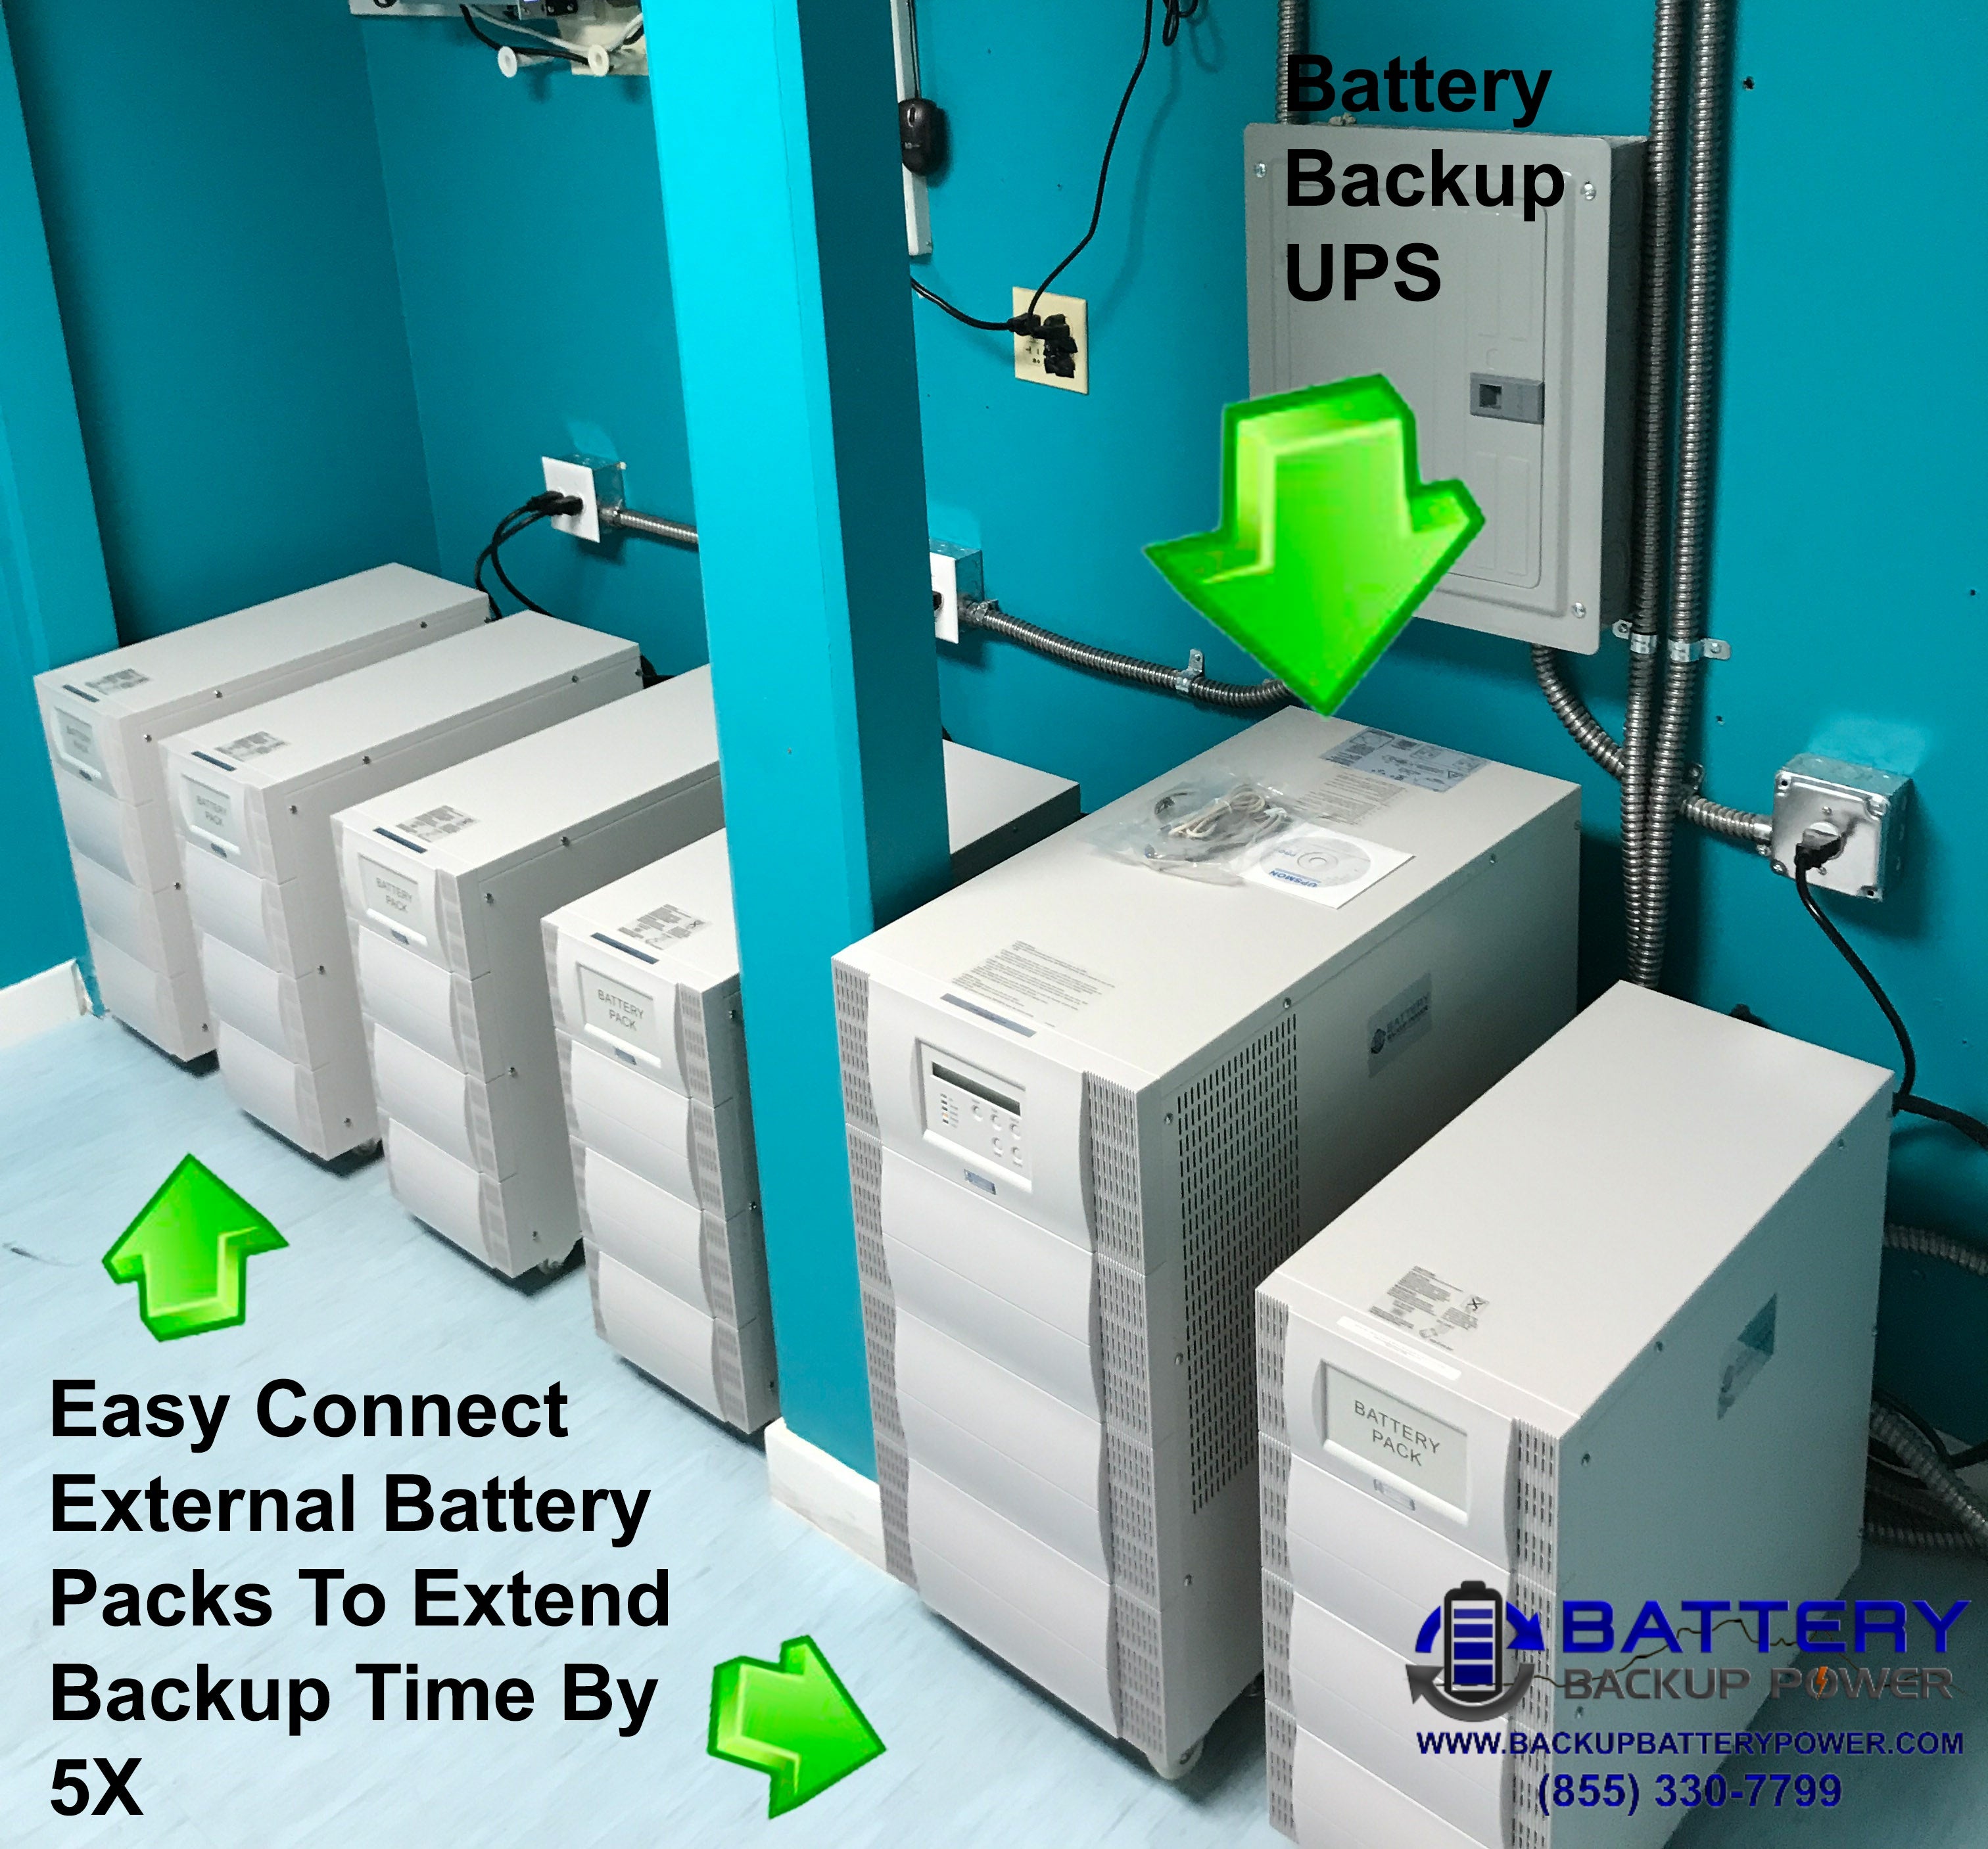 Expandable Battery Backup Systems Are Replacing Generators As The Prim – Battery  Backup Power, Inc.